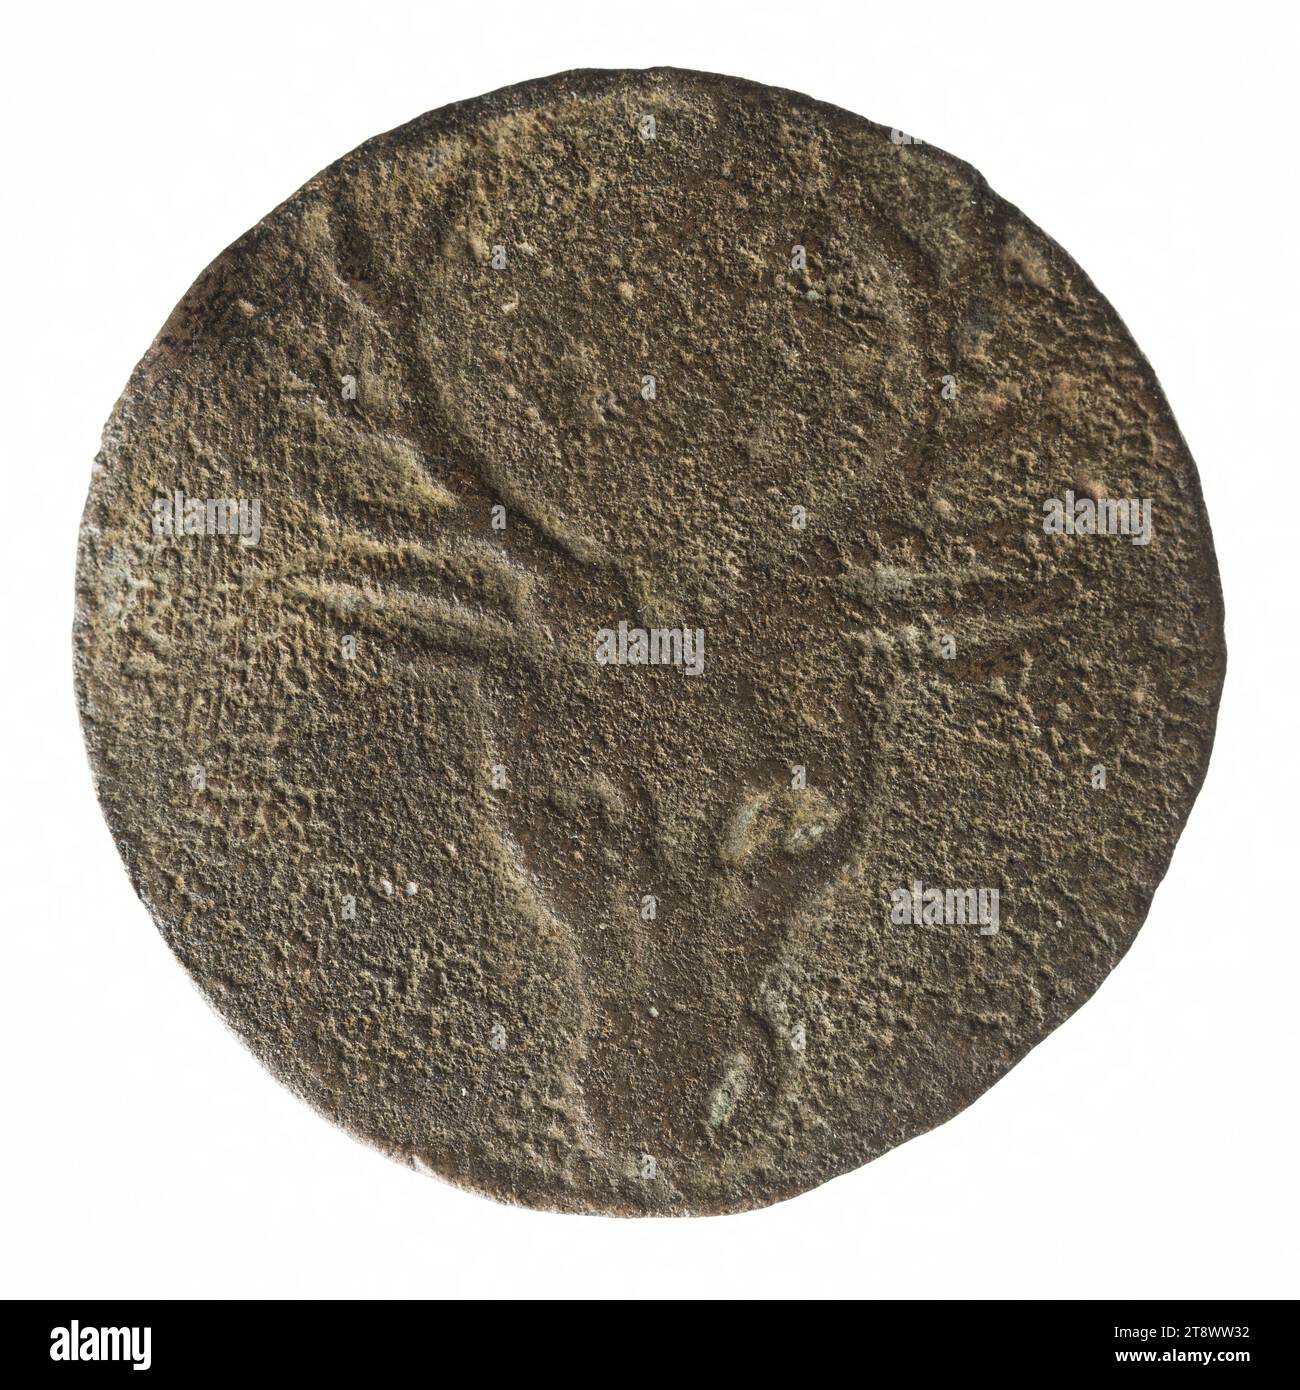 Venerie, 14th century, Anonymous, Engraver in medals, Between 1300 and 1400, 14th century, Numismatics, Token (numismatics), Copper, Dimensions - Work: Diameter: 2.2 cm, Weight (type dimension): 1.78 g Stock Photo